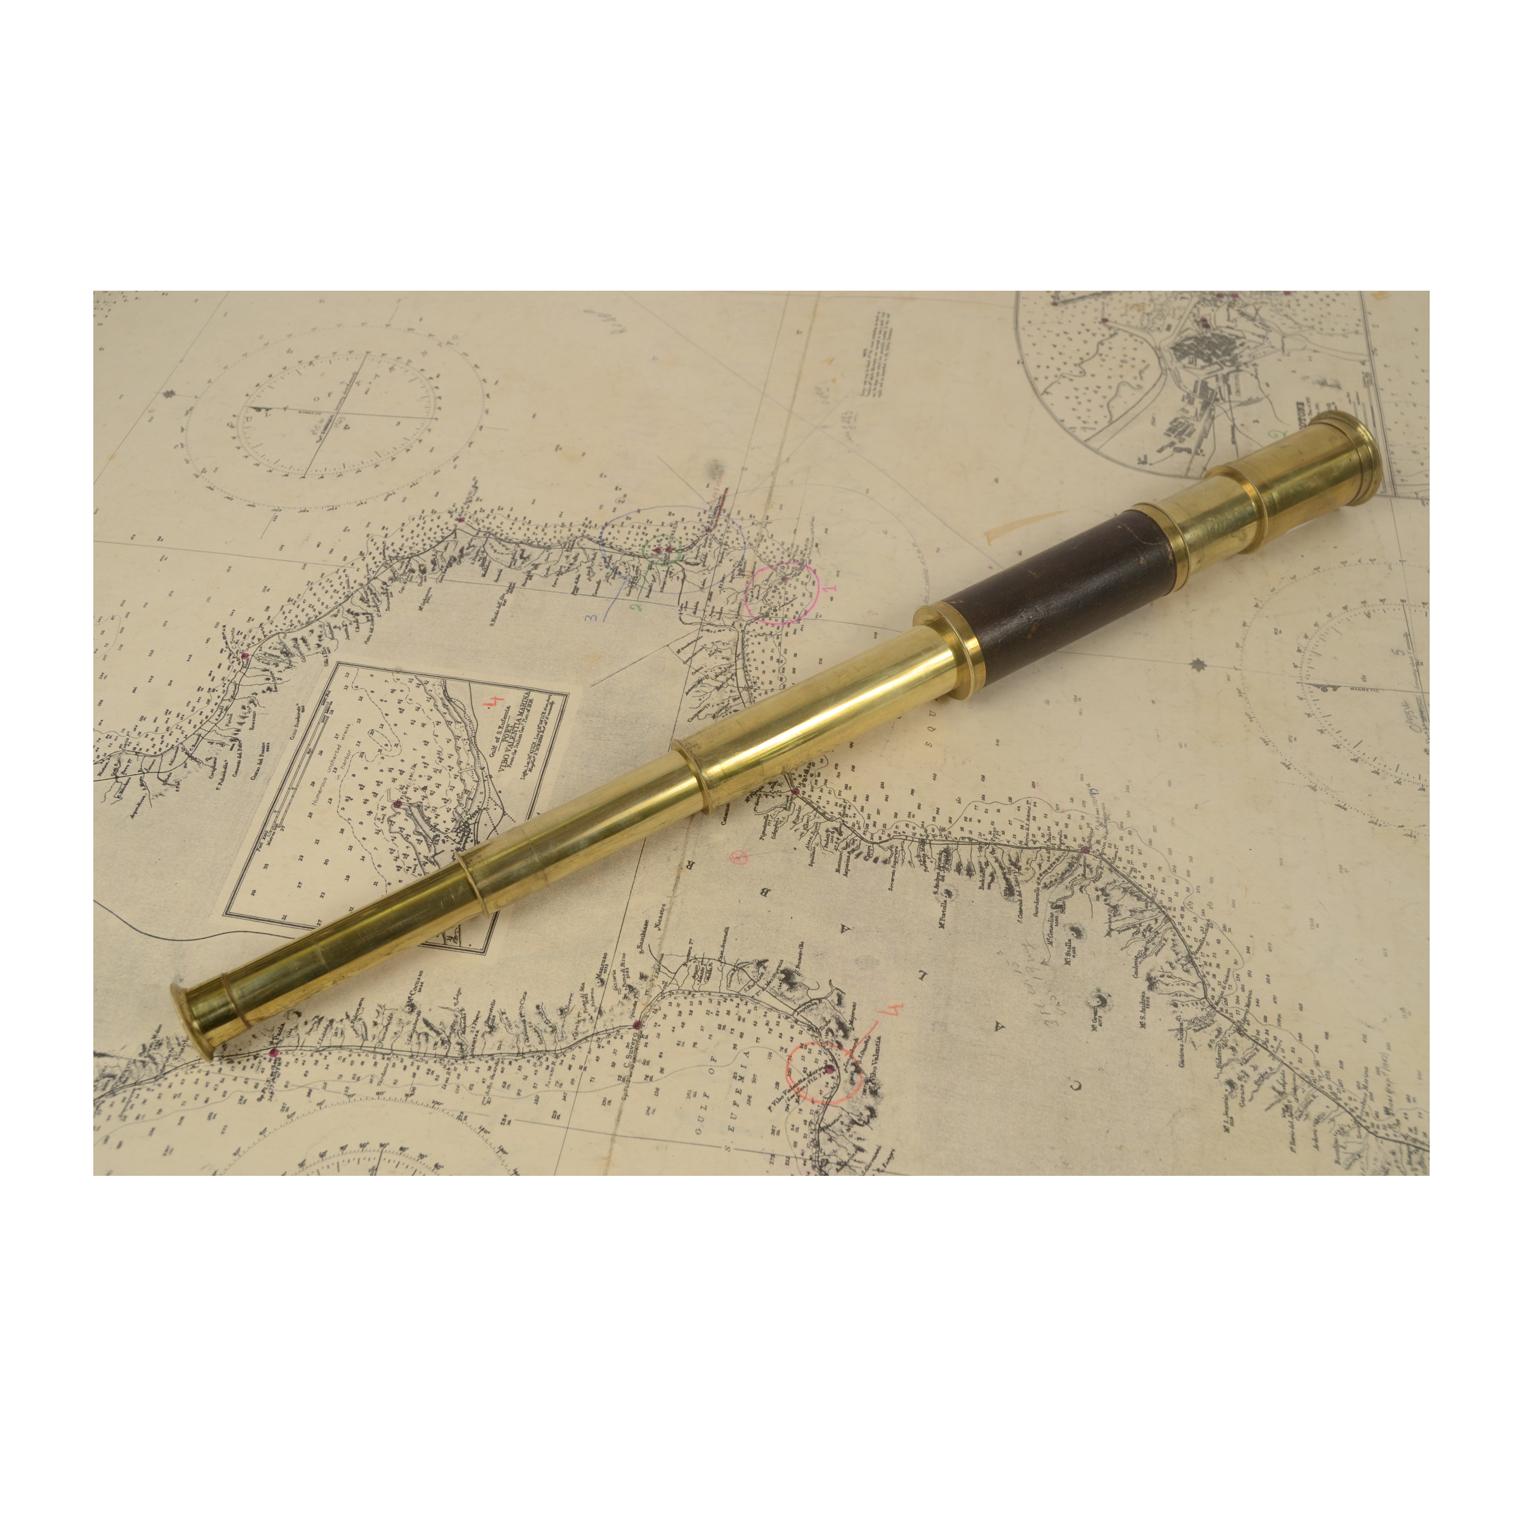 Telescope made of brass with painted brass handle, English manufacture of the early 20th century.
Focusing with three extensions, complete with dust protection and sun visor extension. Maximum length 53 cm, minimum 17 cm, focal diameter 2.5